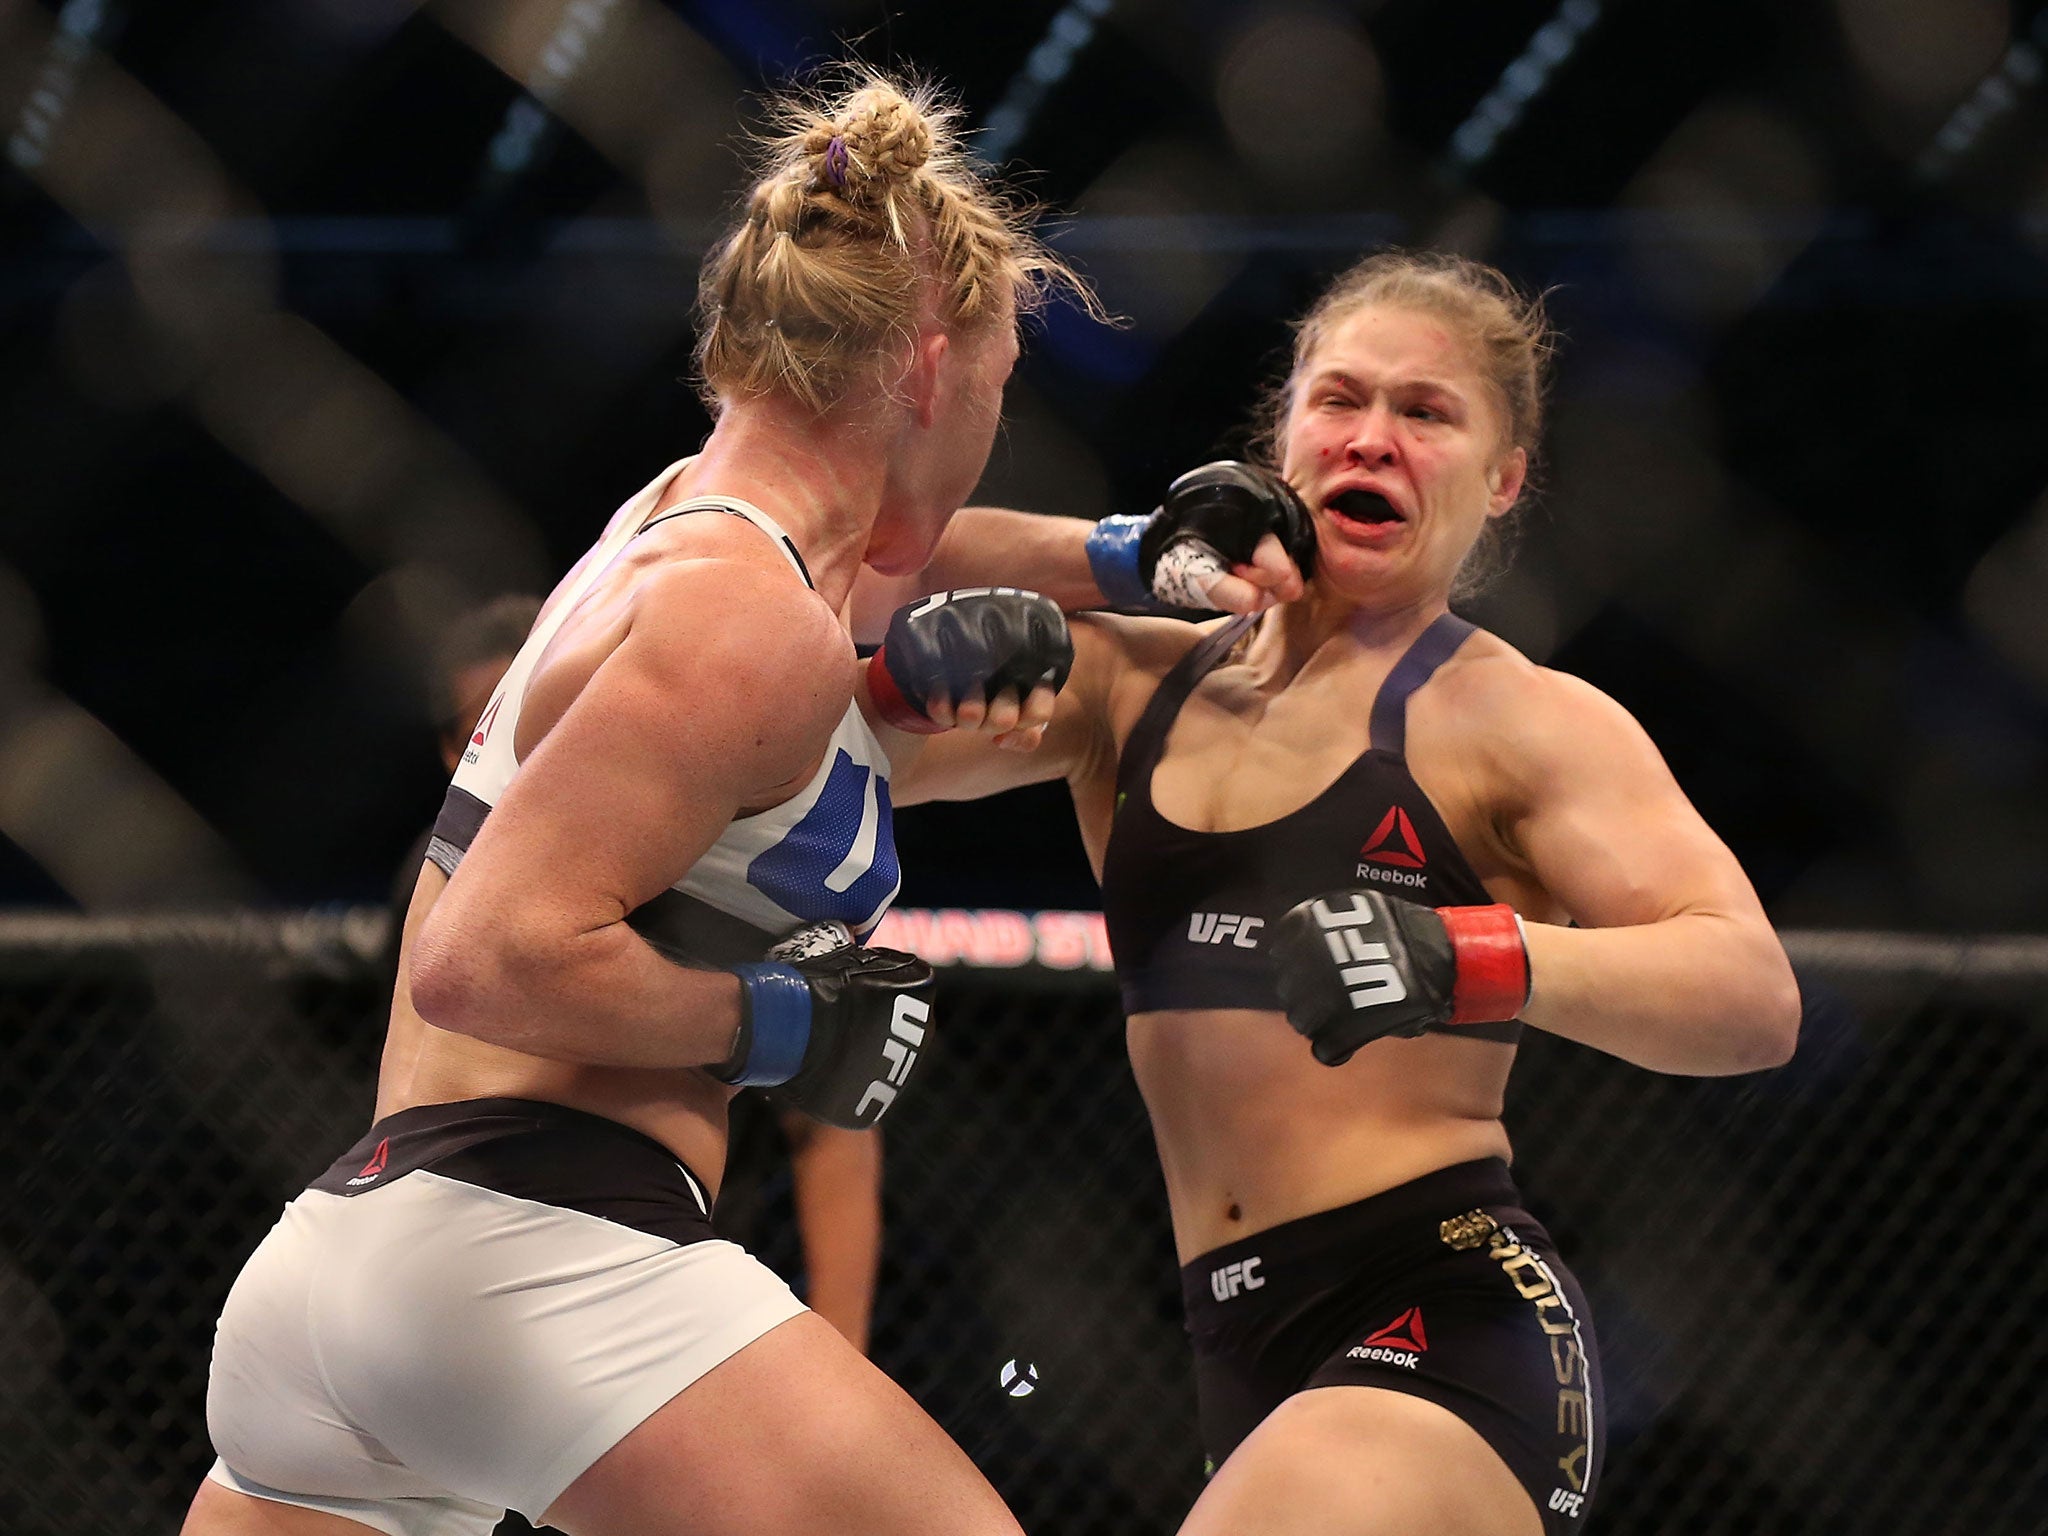 Rousey suffered the first defeat of her career at UFC 193 in November 2015